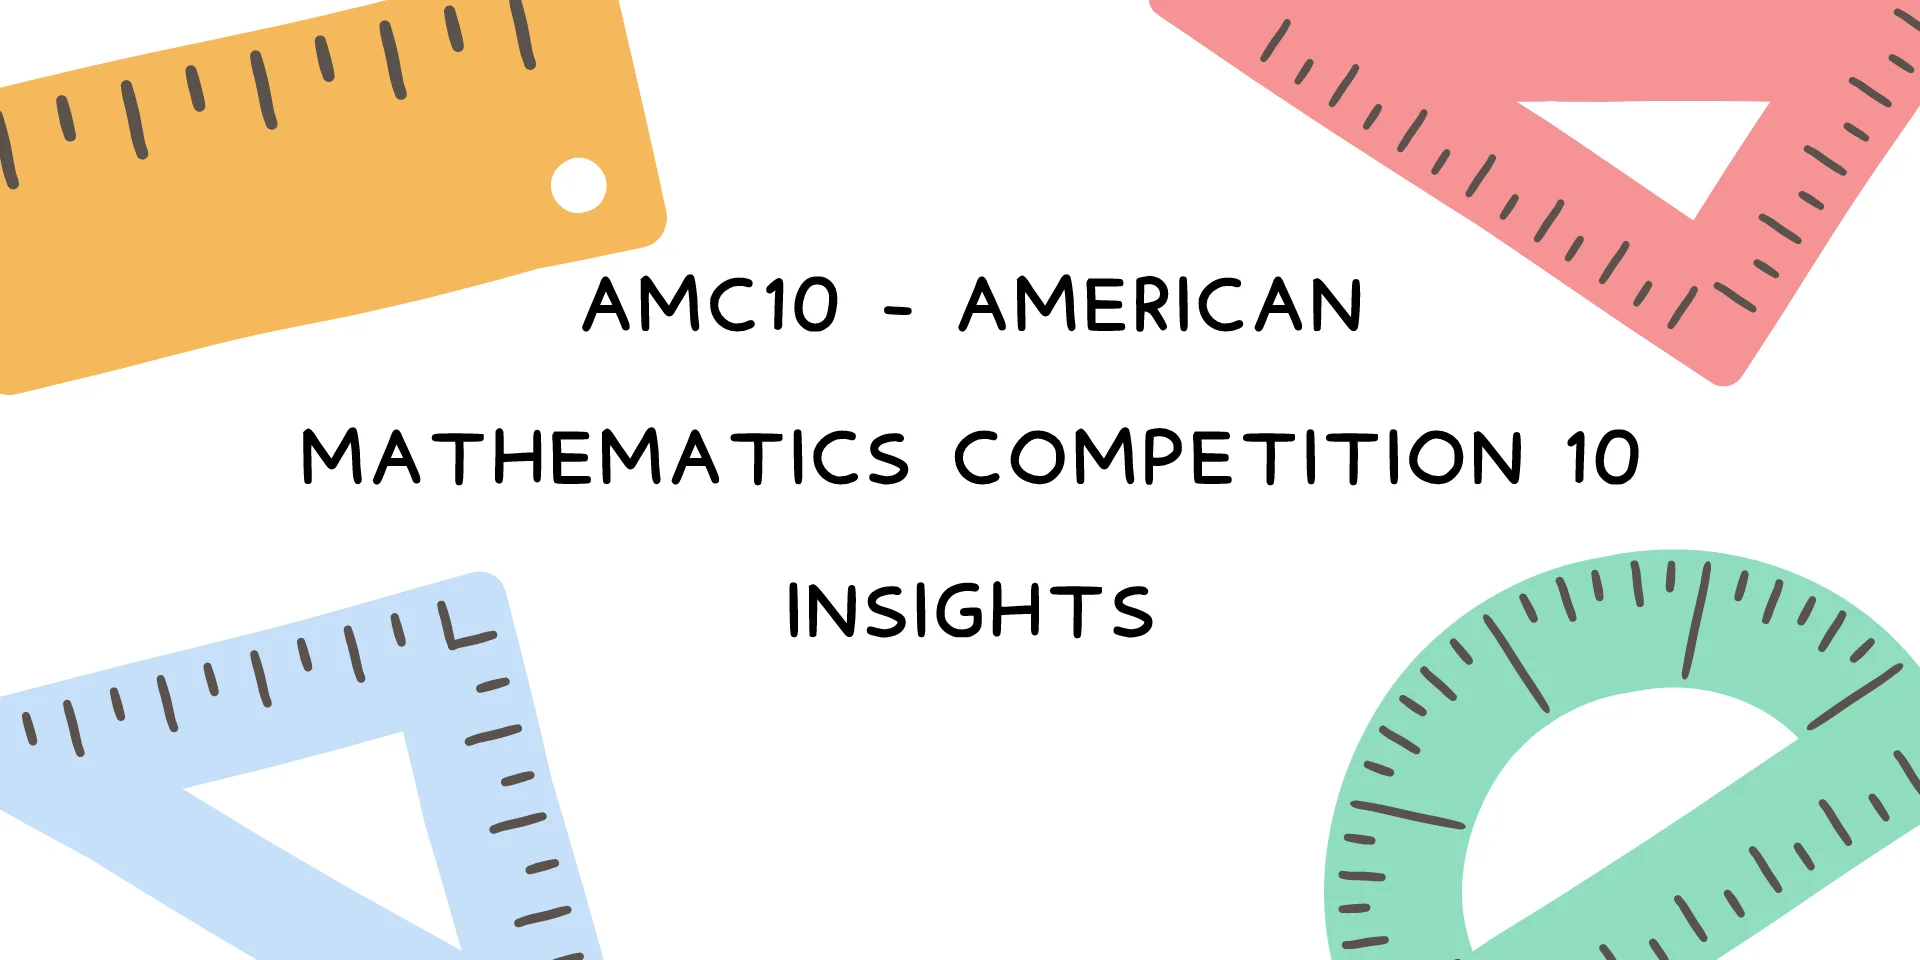 AMC10基础入门 is part of the American Mathematics Competitions and is aimed at high school students. Specifically, the AMC 10 is designed for students in grades 10 and below.